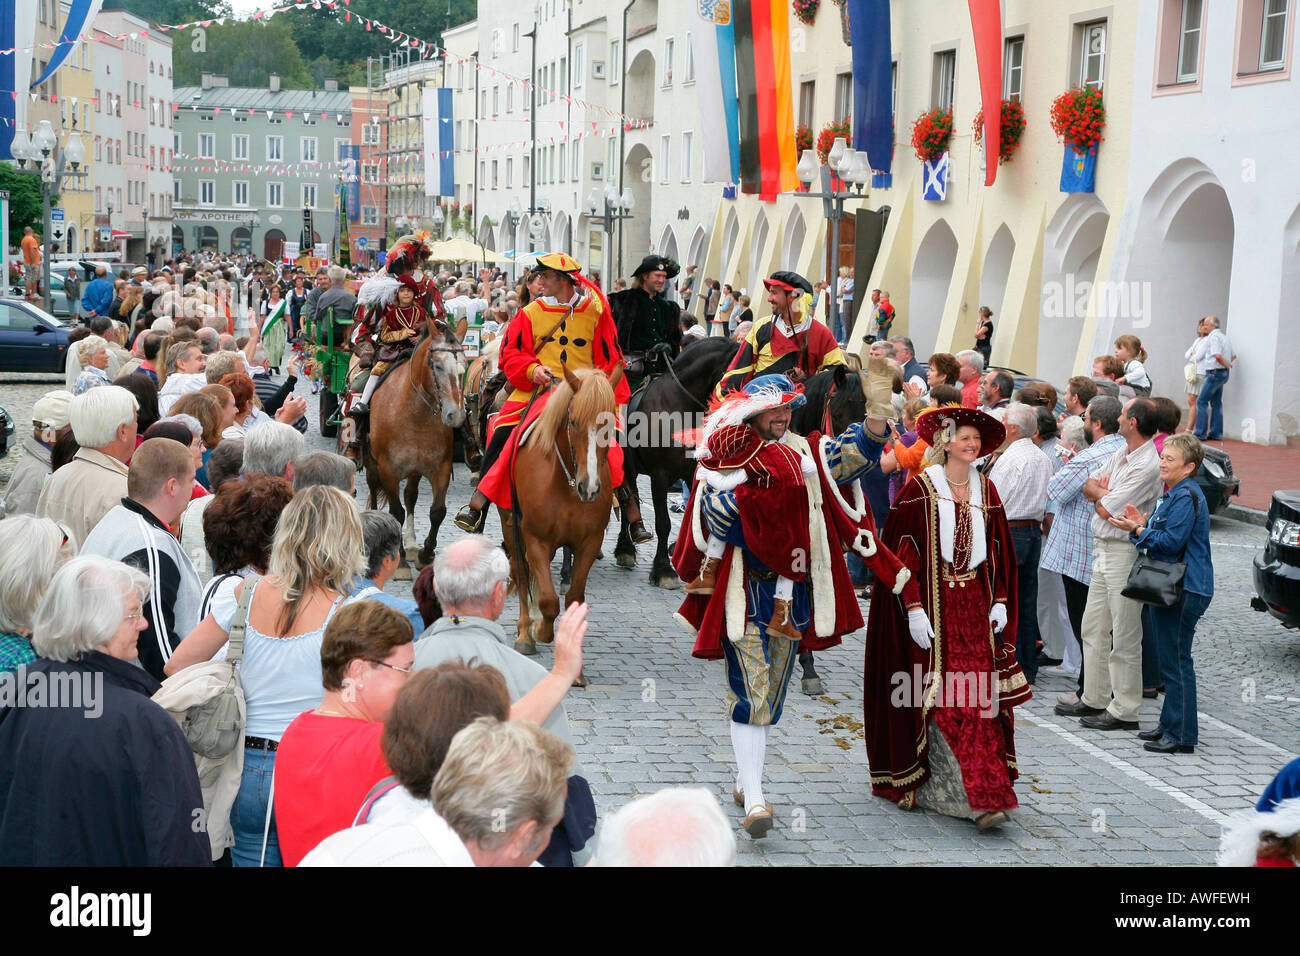 Enthusiasts dressed in medieval garb at an international festival for traditional costume in Muehldorf am Inn, Upper Bavaria, B Stock Photo